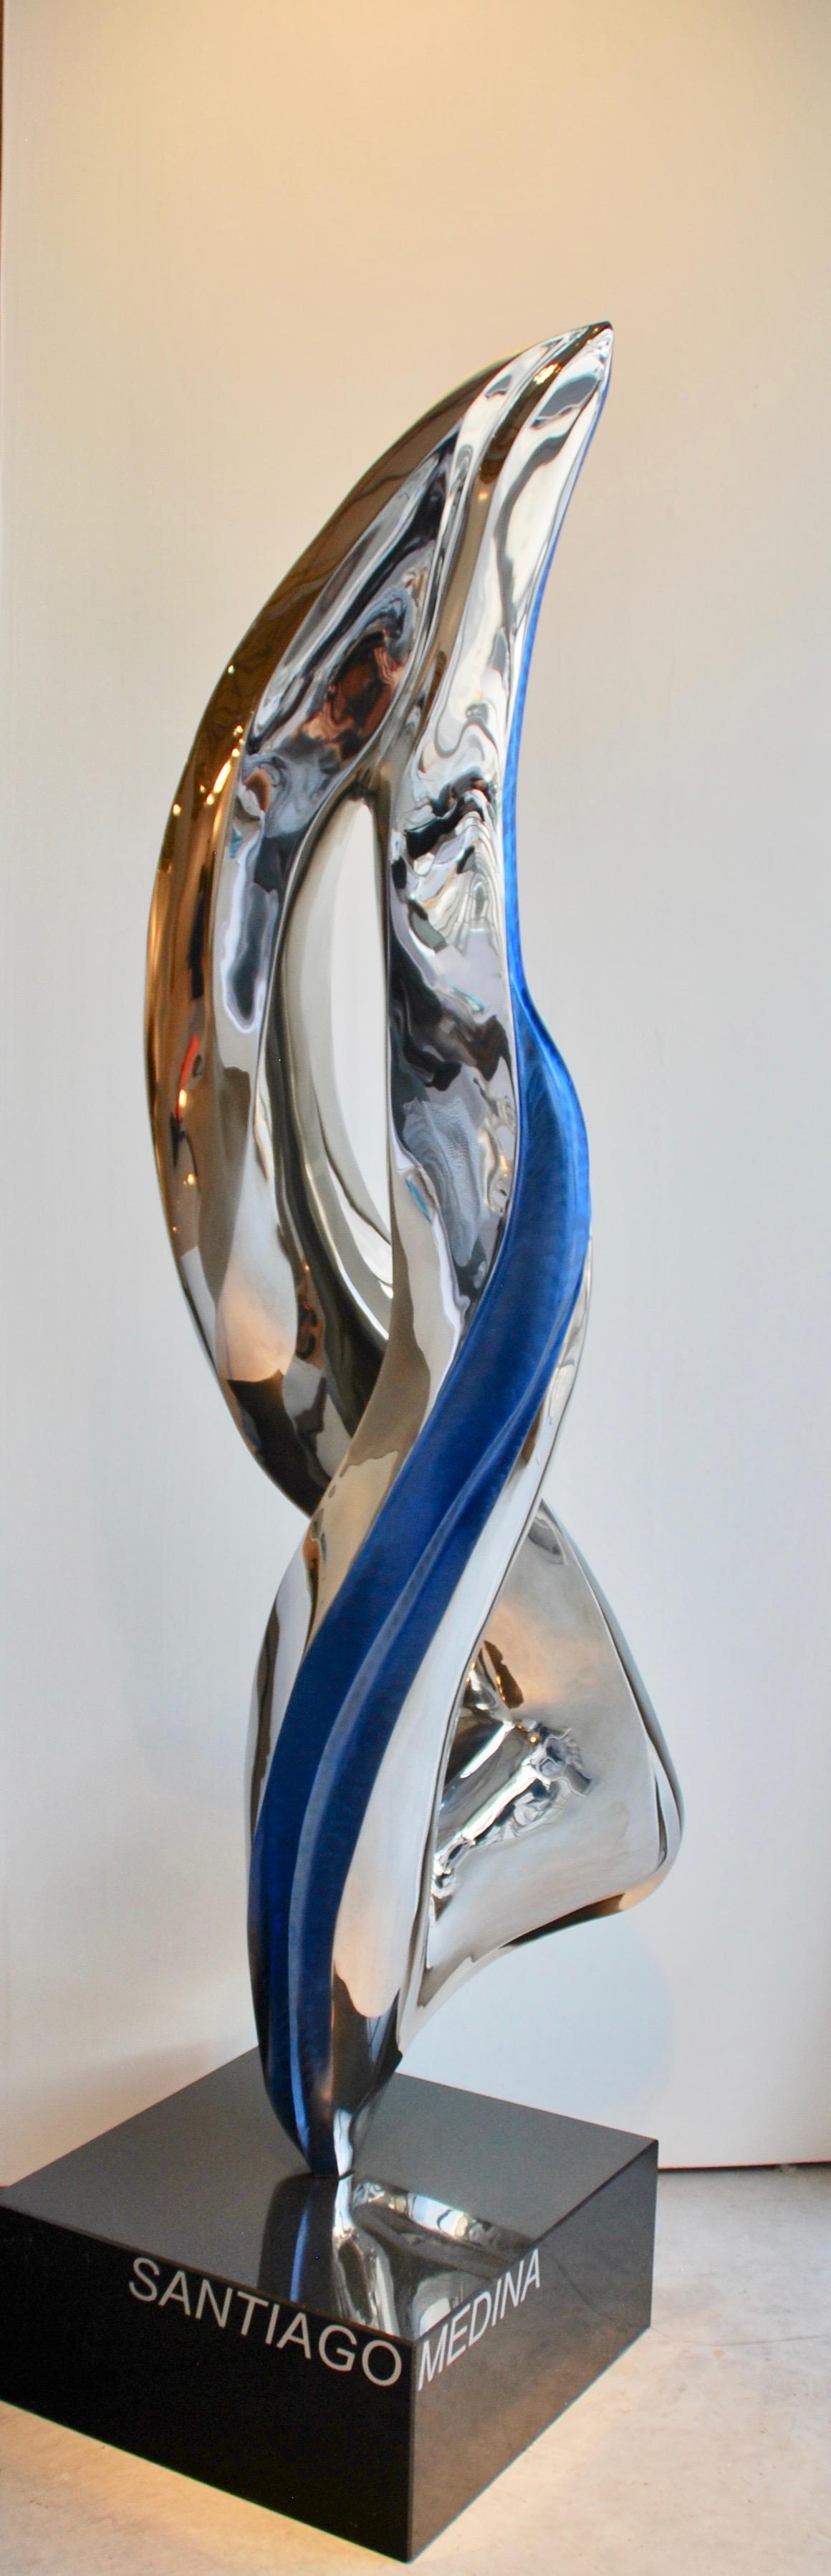 Italian stainless steel with blue tint and granite base. Harvard University has one of the editions permanently.

This sculpture will be shipped directly from the artist's studio.